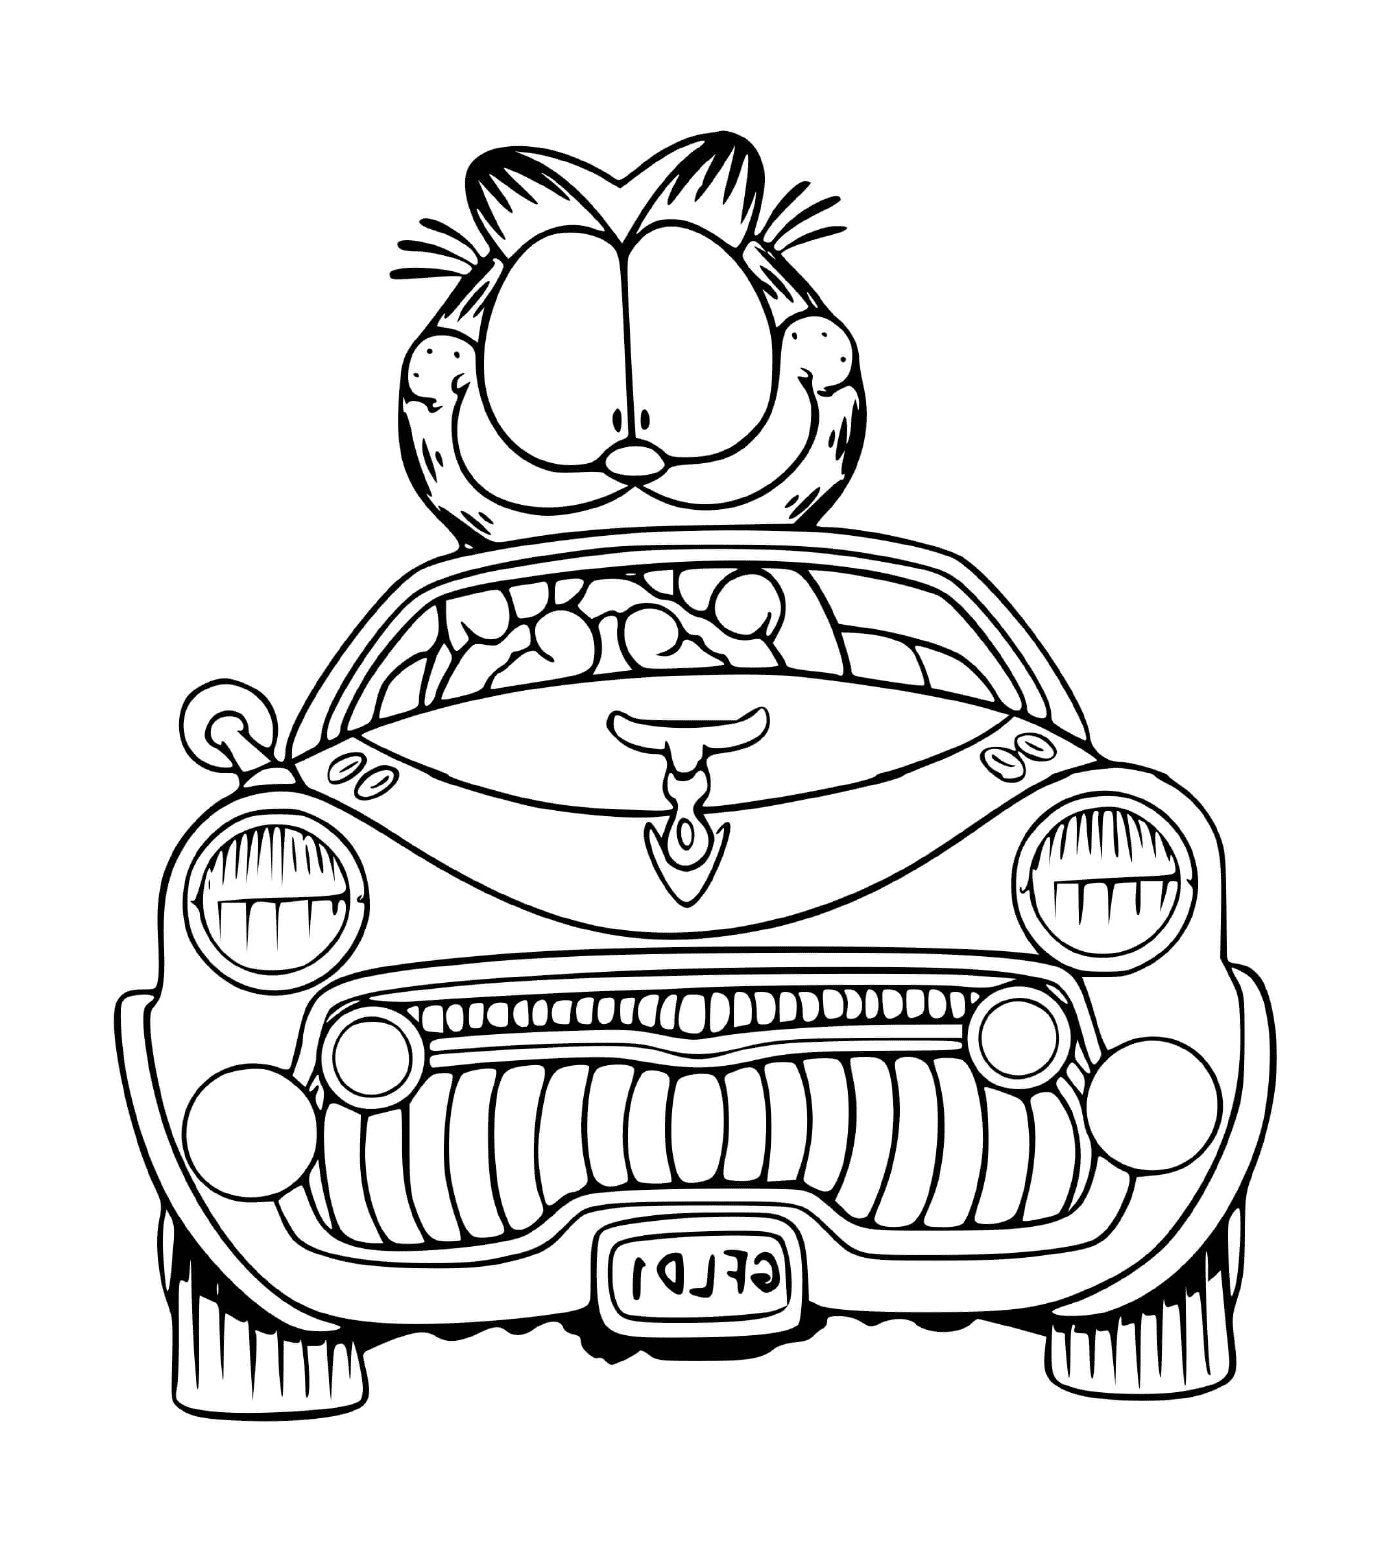  Garfield benefits from a luxury car 